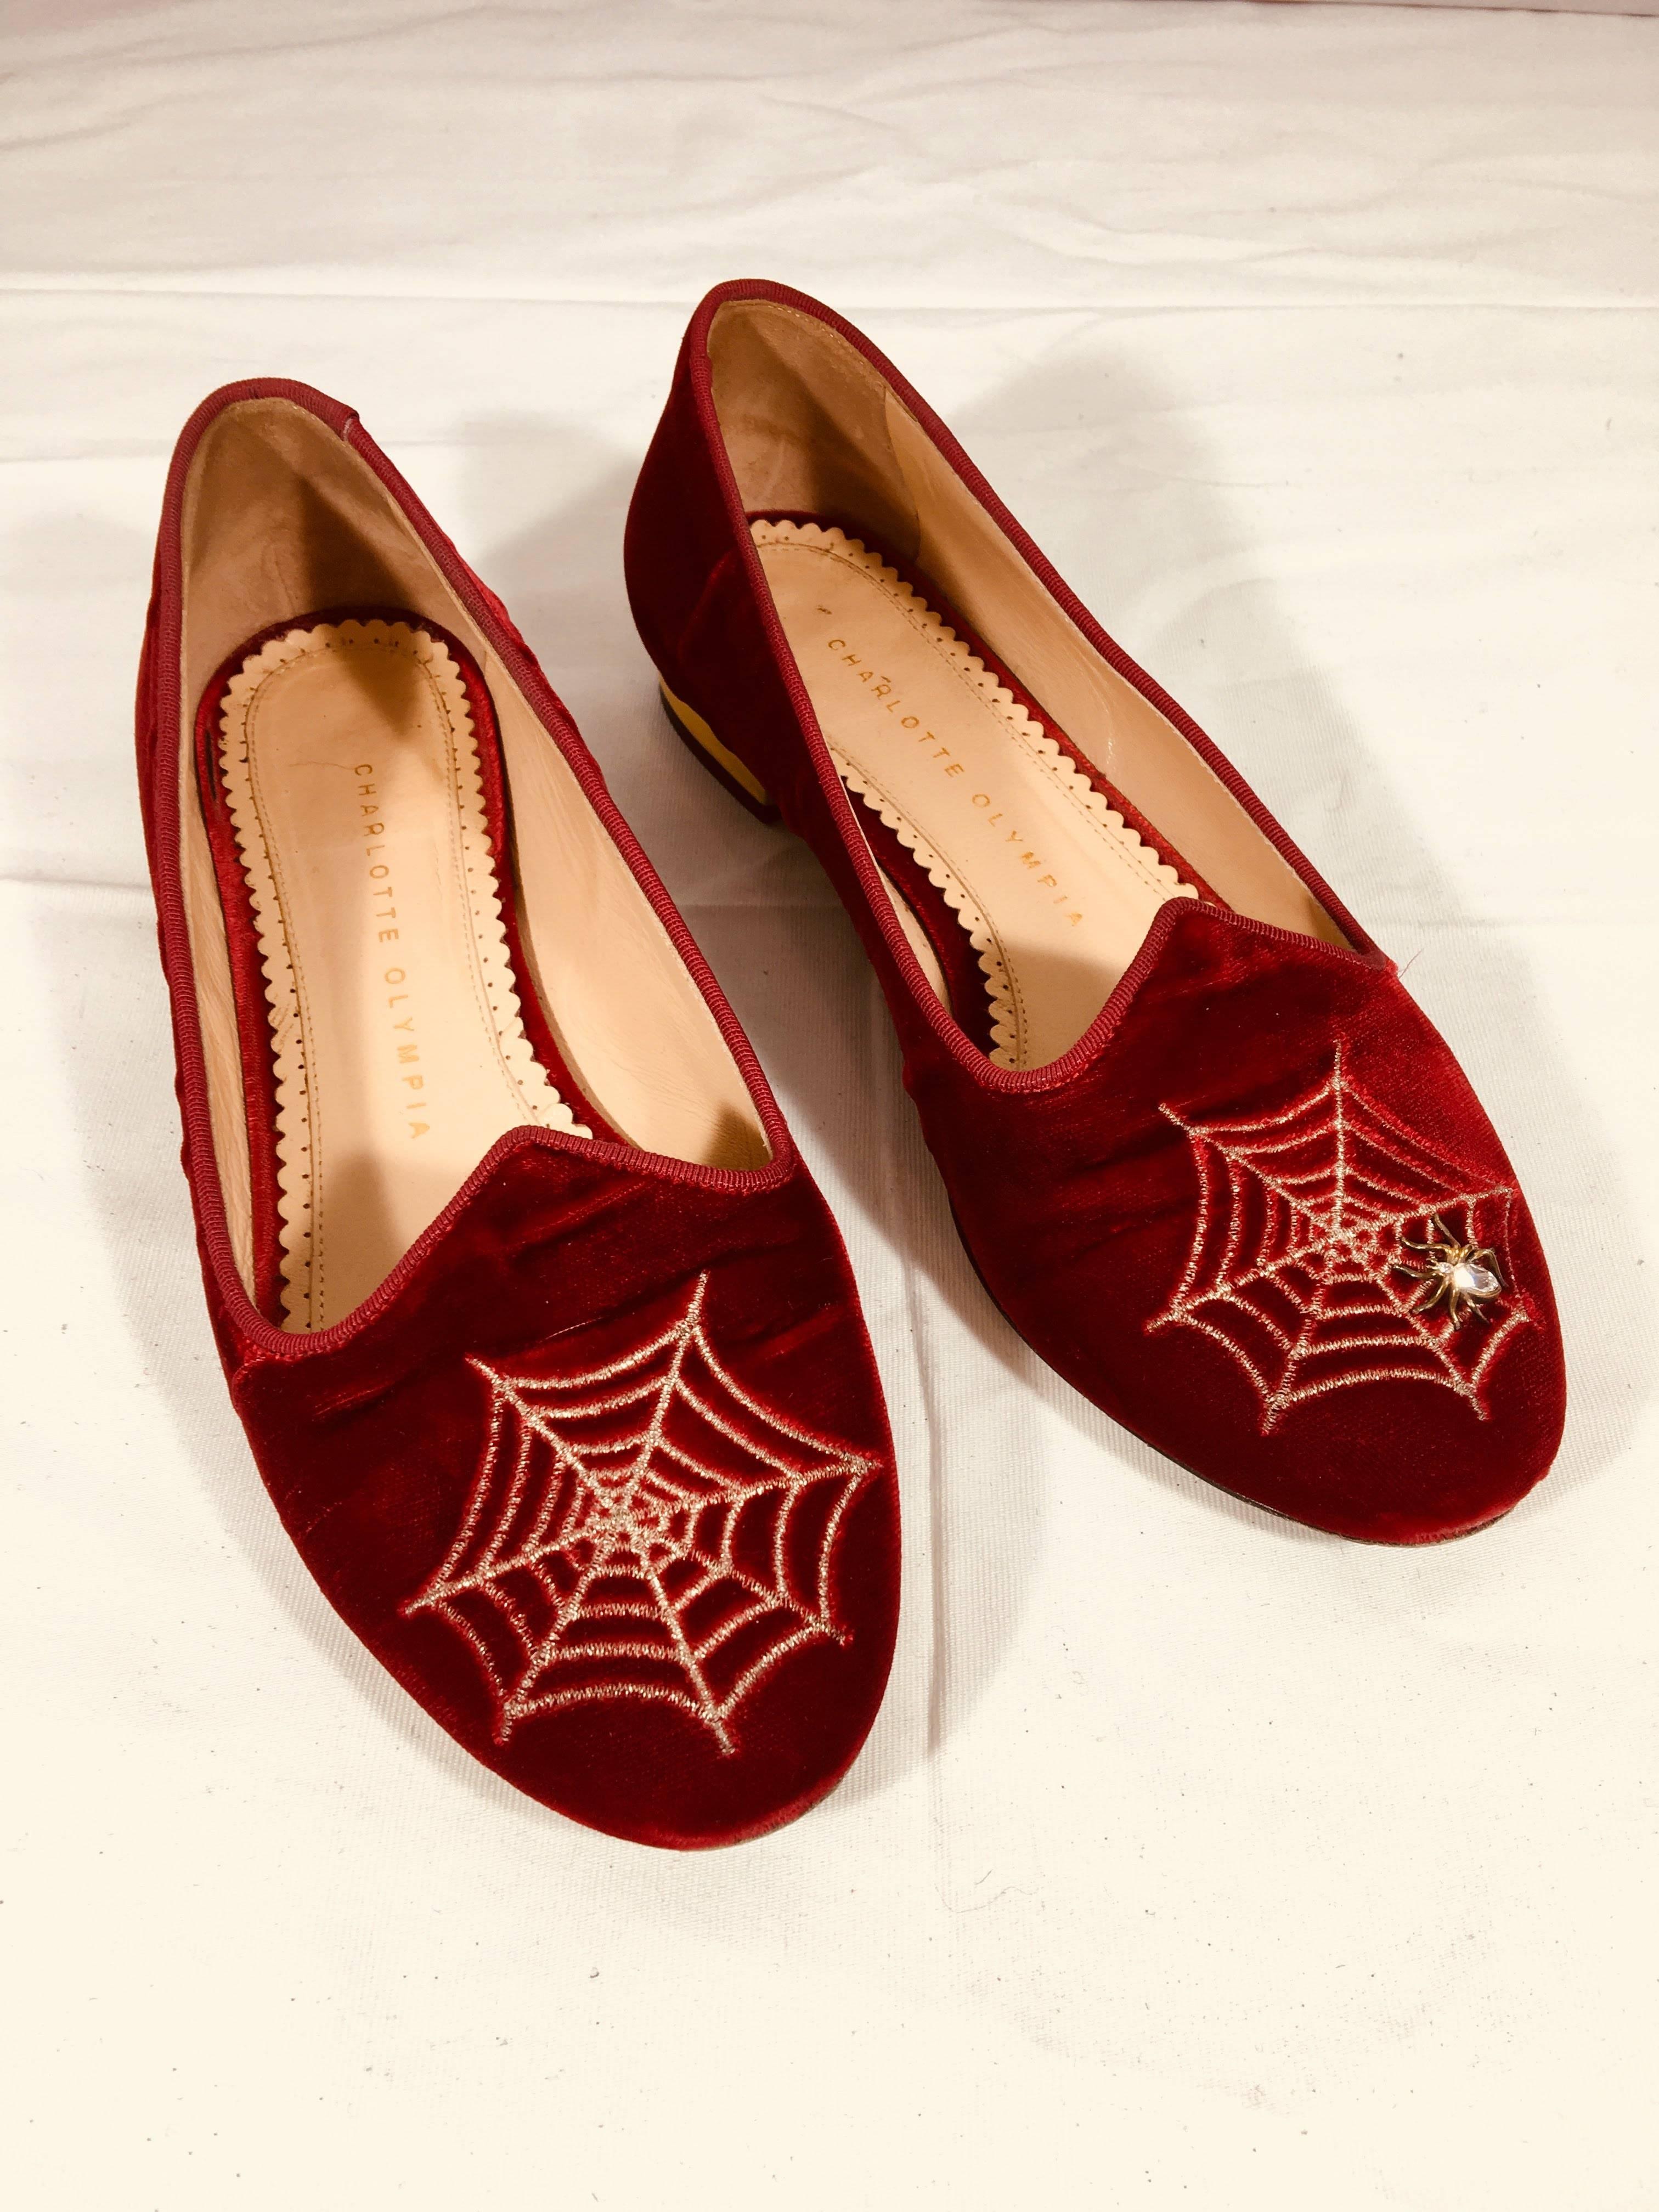 Charlotte Olympia Spider Web Loafers. Red Velvet with Round Toe with Embroidered Spider Web and Left Shoe with Embellished Spider.